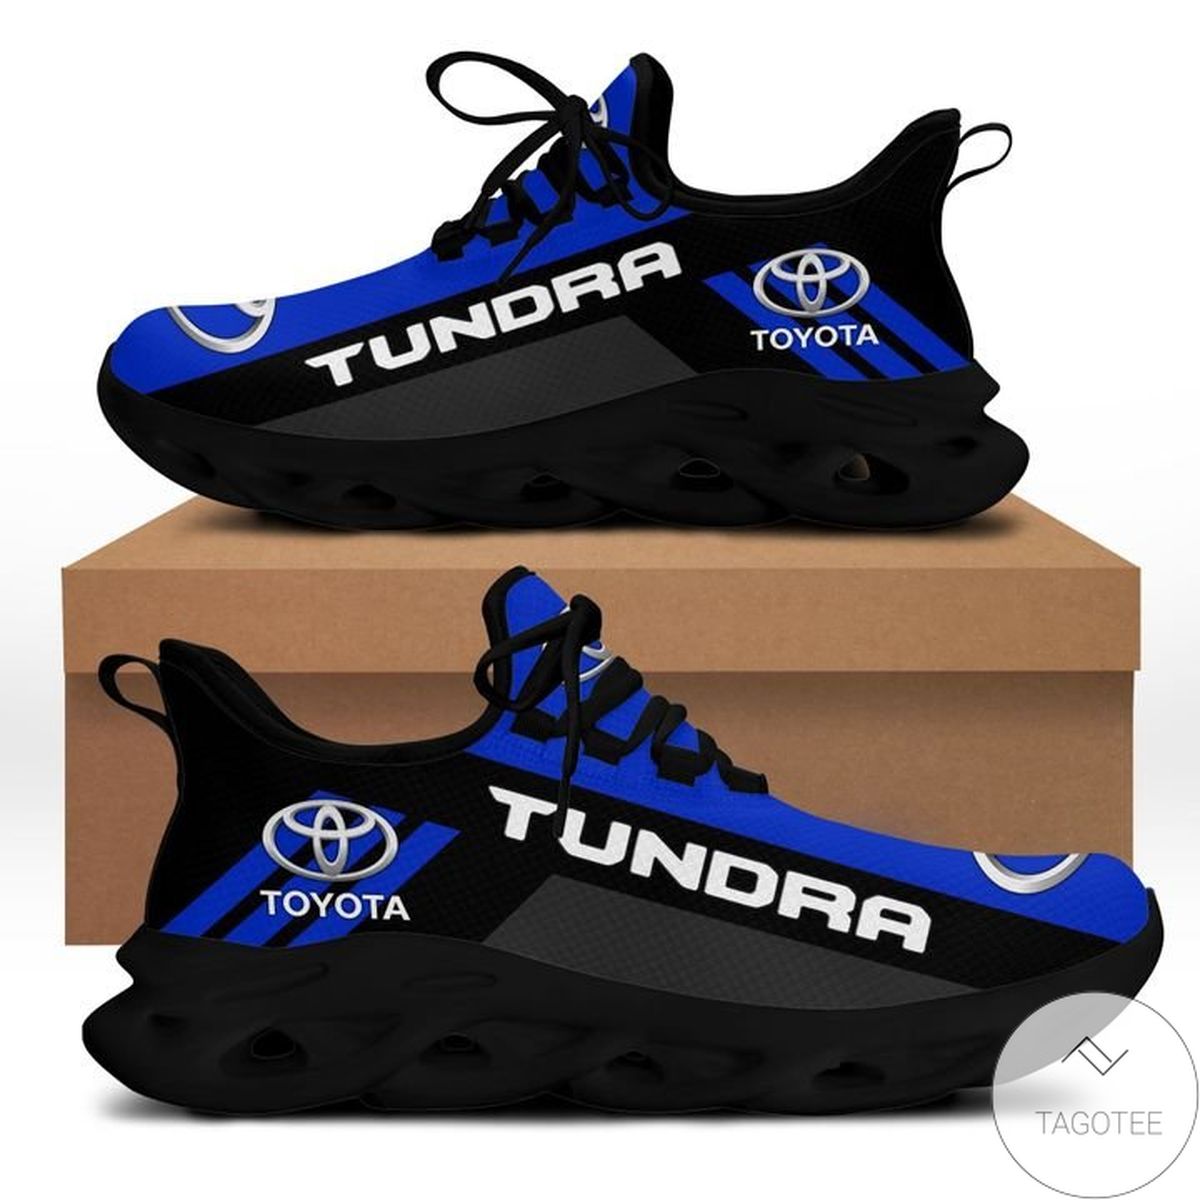 Toyota Tundra Blue Yeezy Running Sneaker Max Soul Shoes